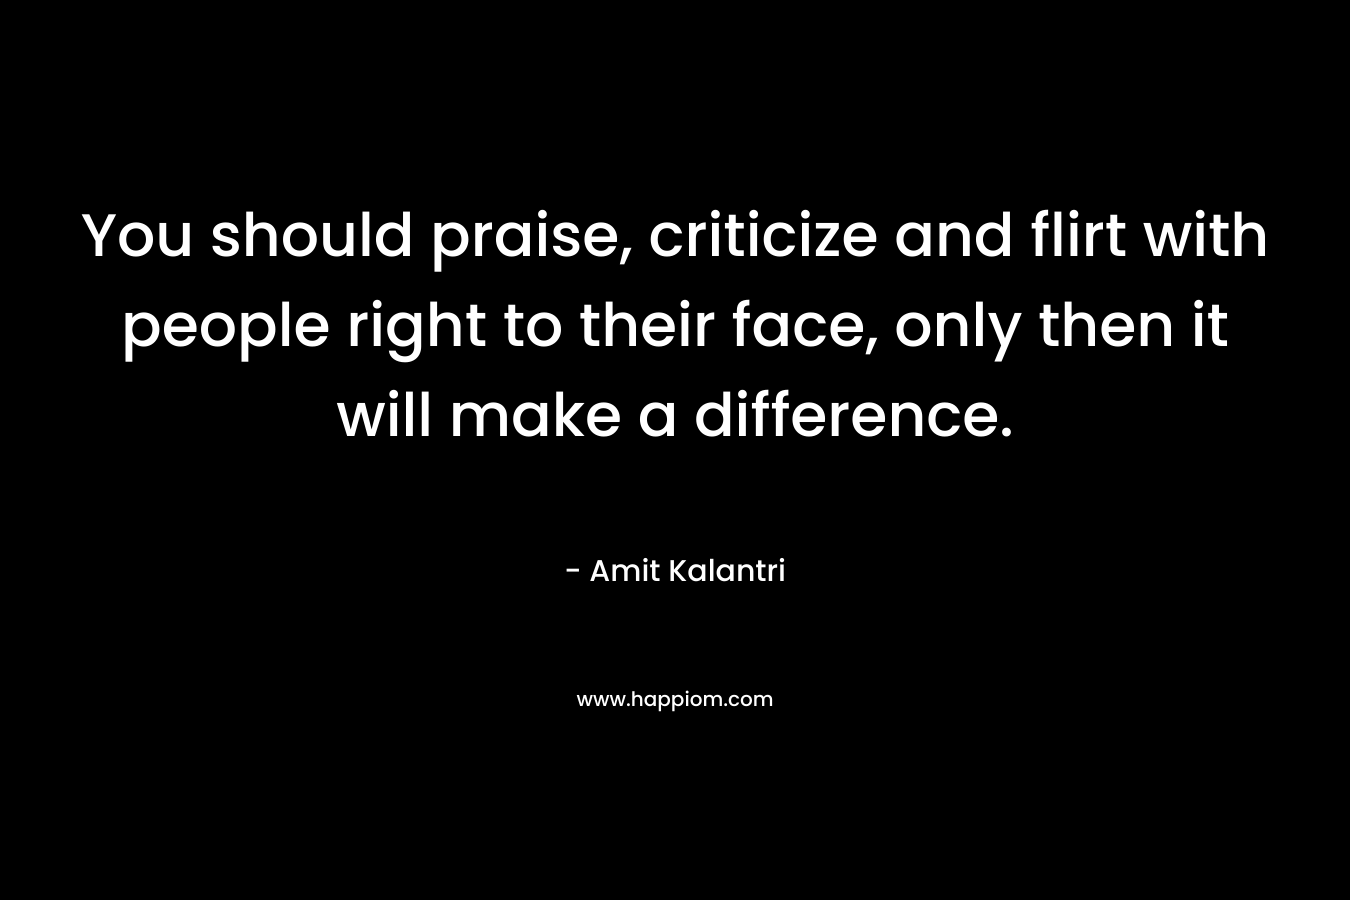 You should praise, criticize and flirt with people right to their face, only then it will make a difference.